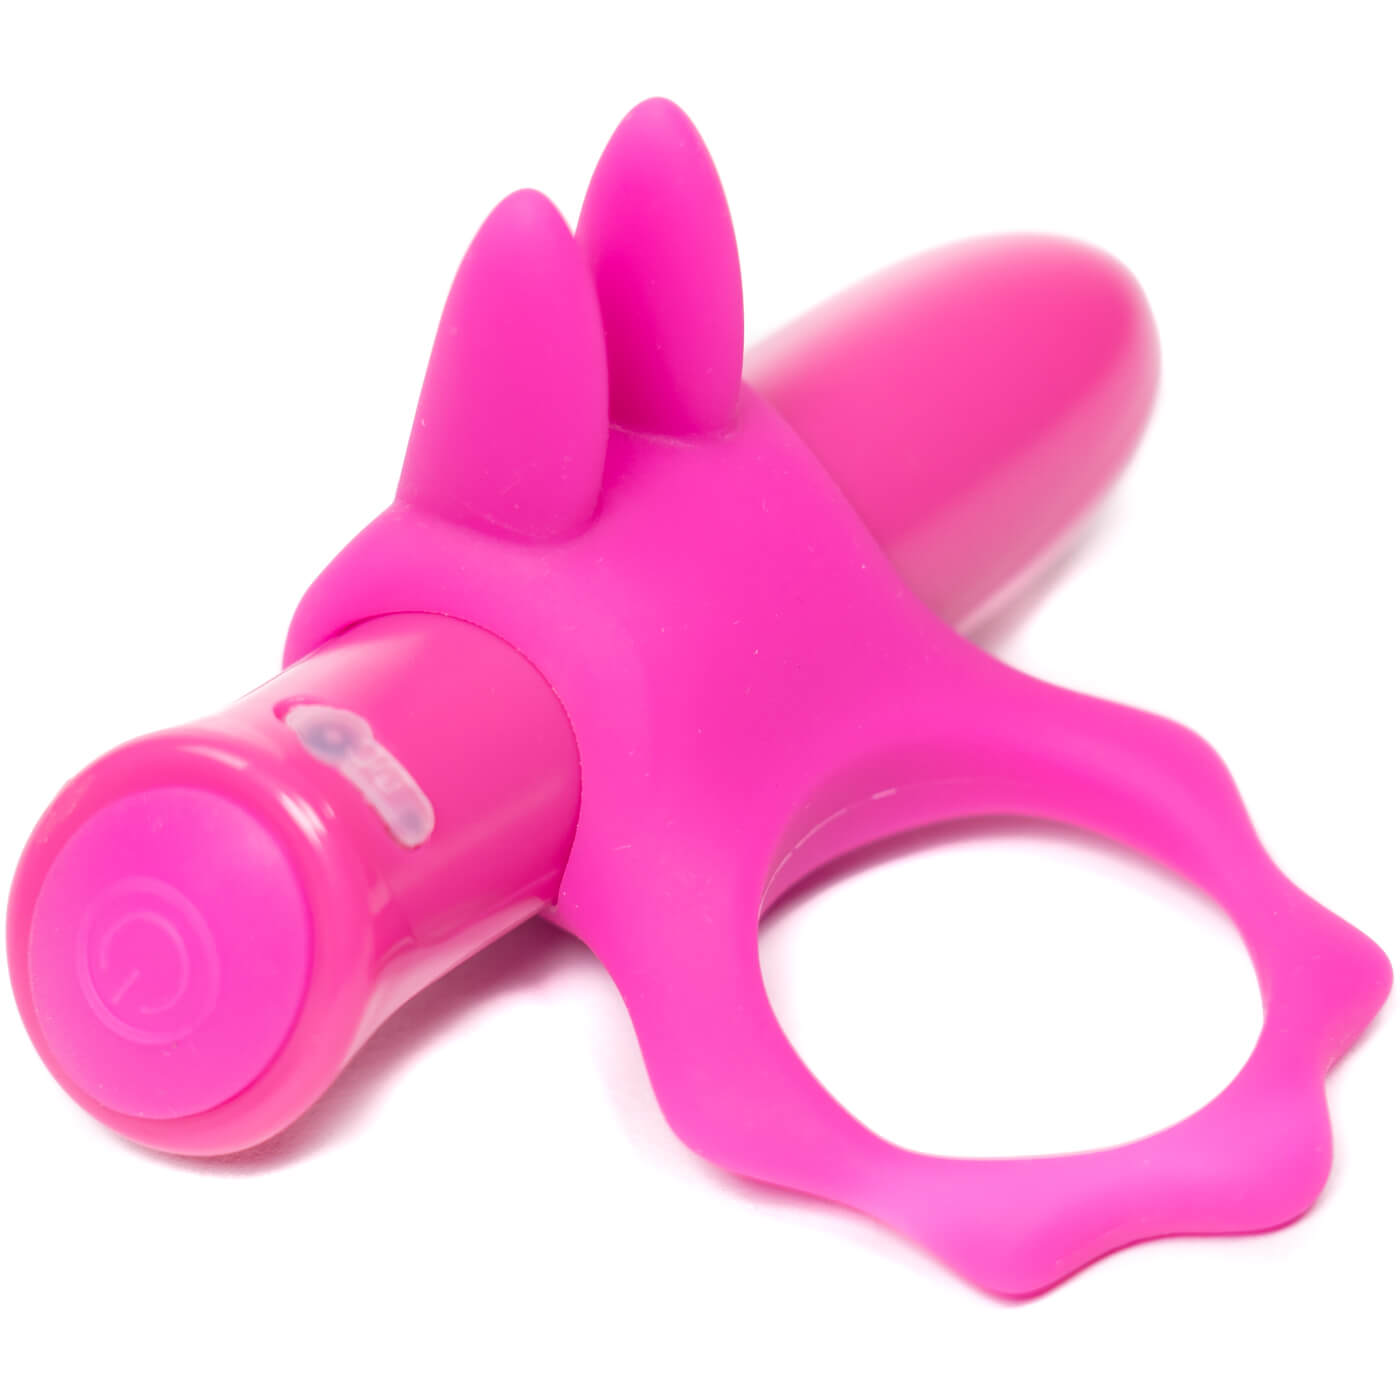 PLAY 7 Function Push Button Powerful Rechargeable Waterproof Vibrating Cock Ring